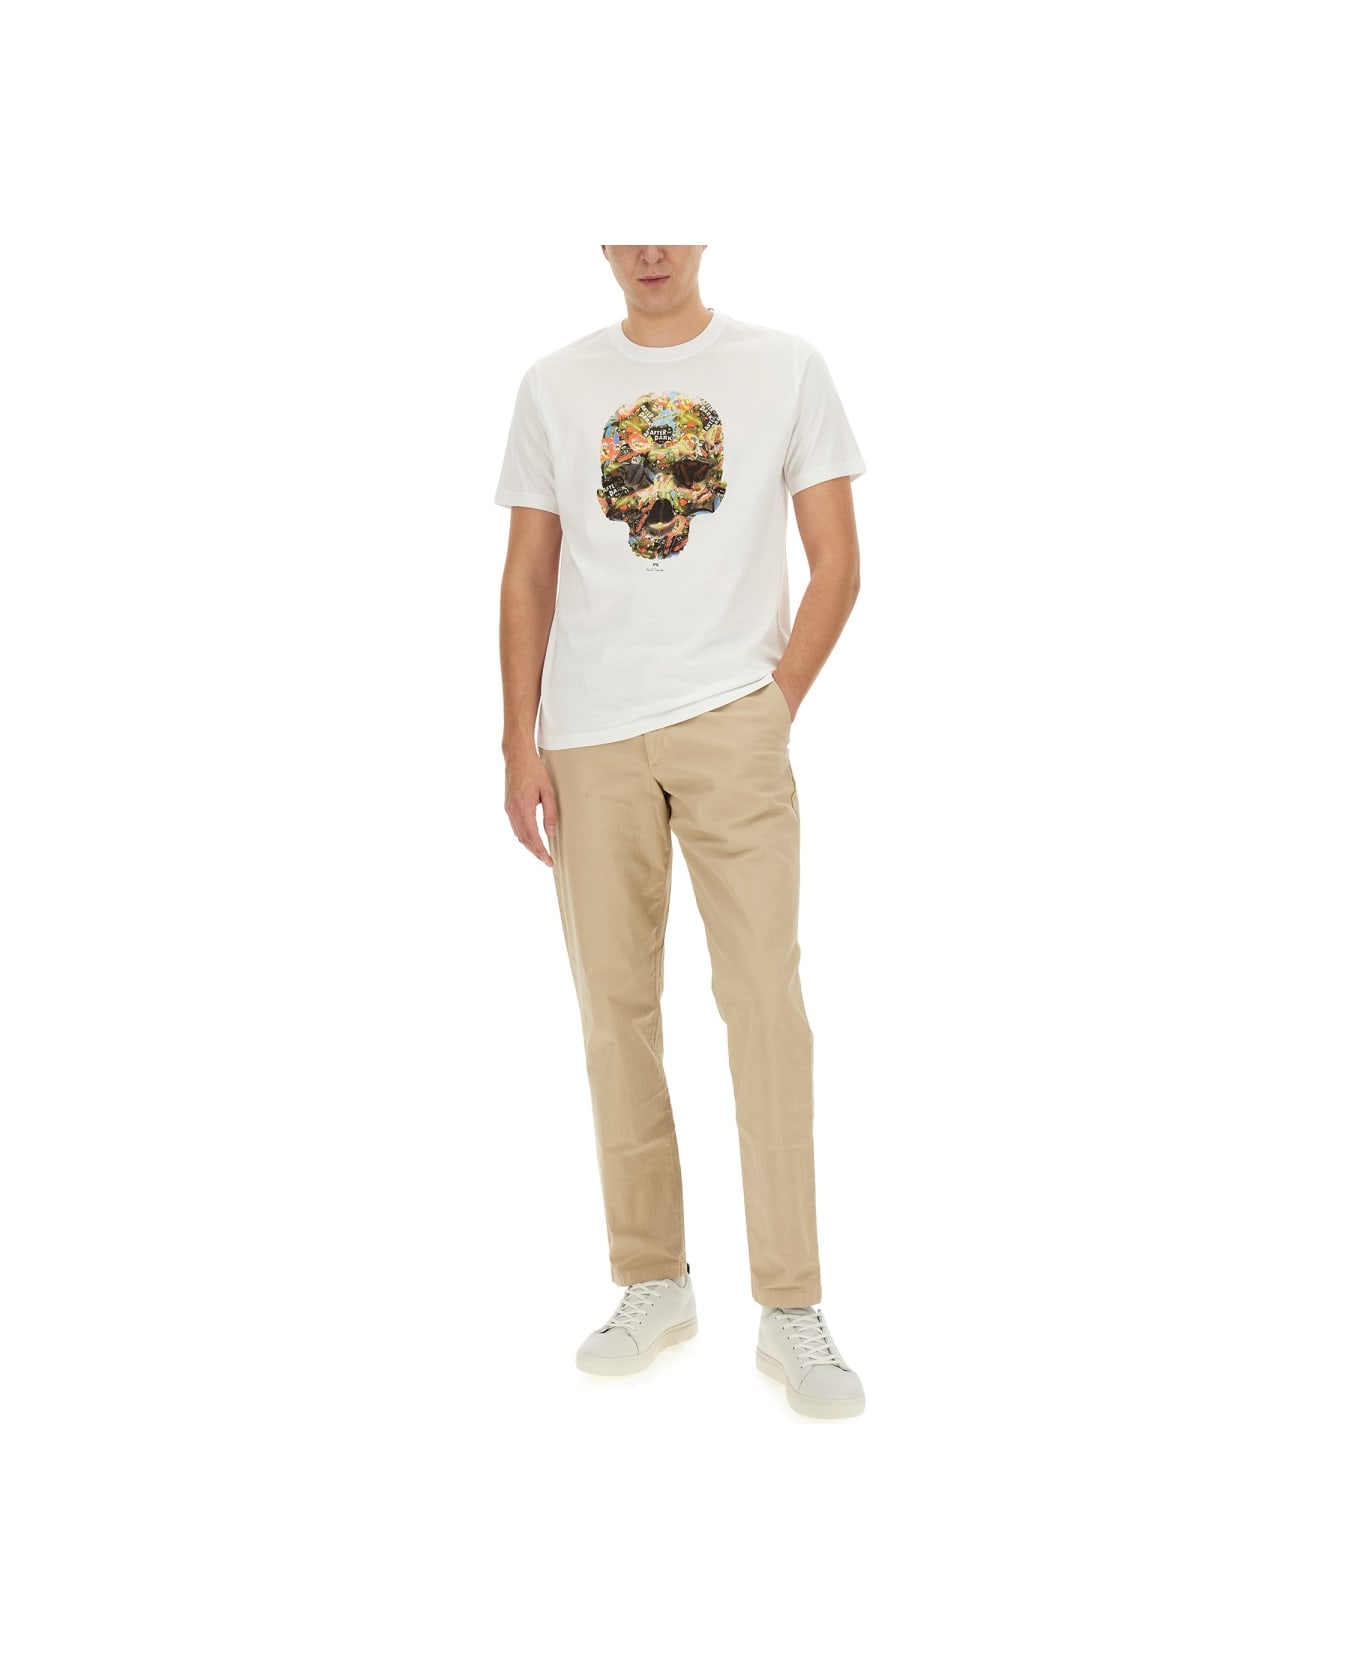 PS by Paul Smith Skull Print T-shirt - WHITE